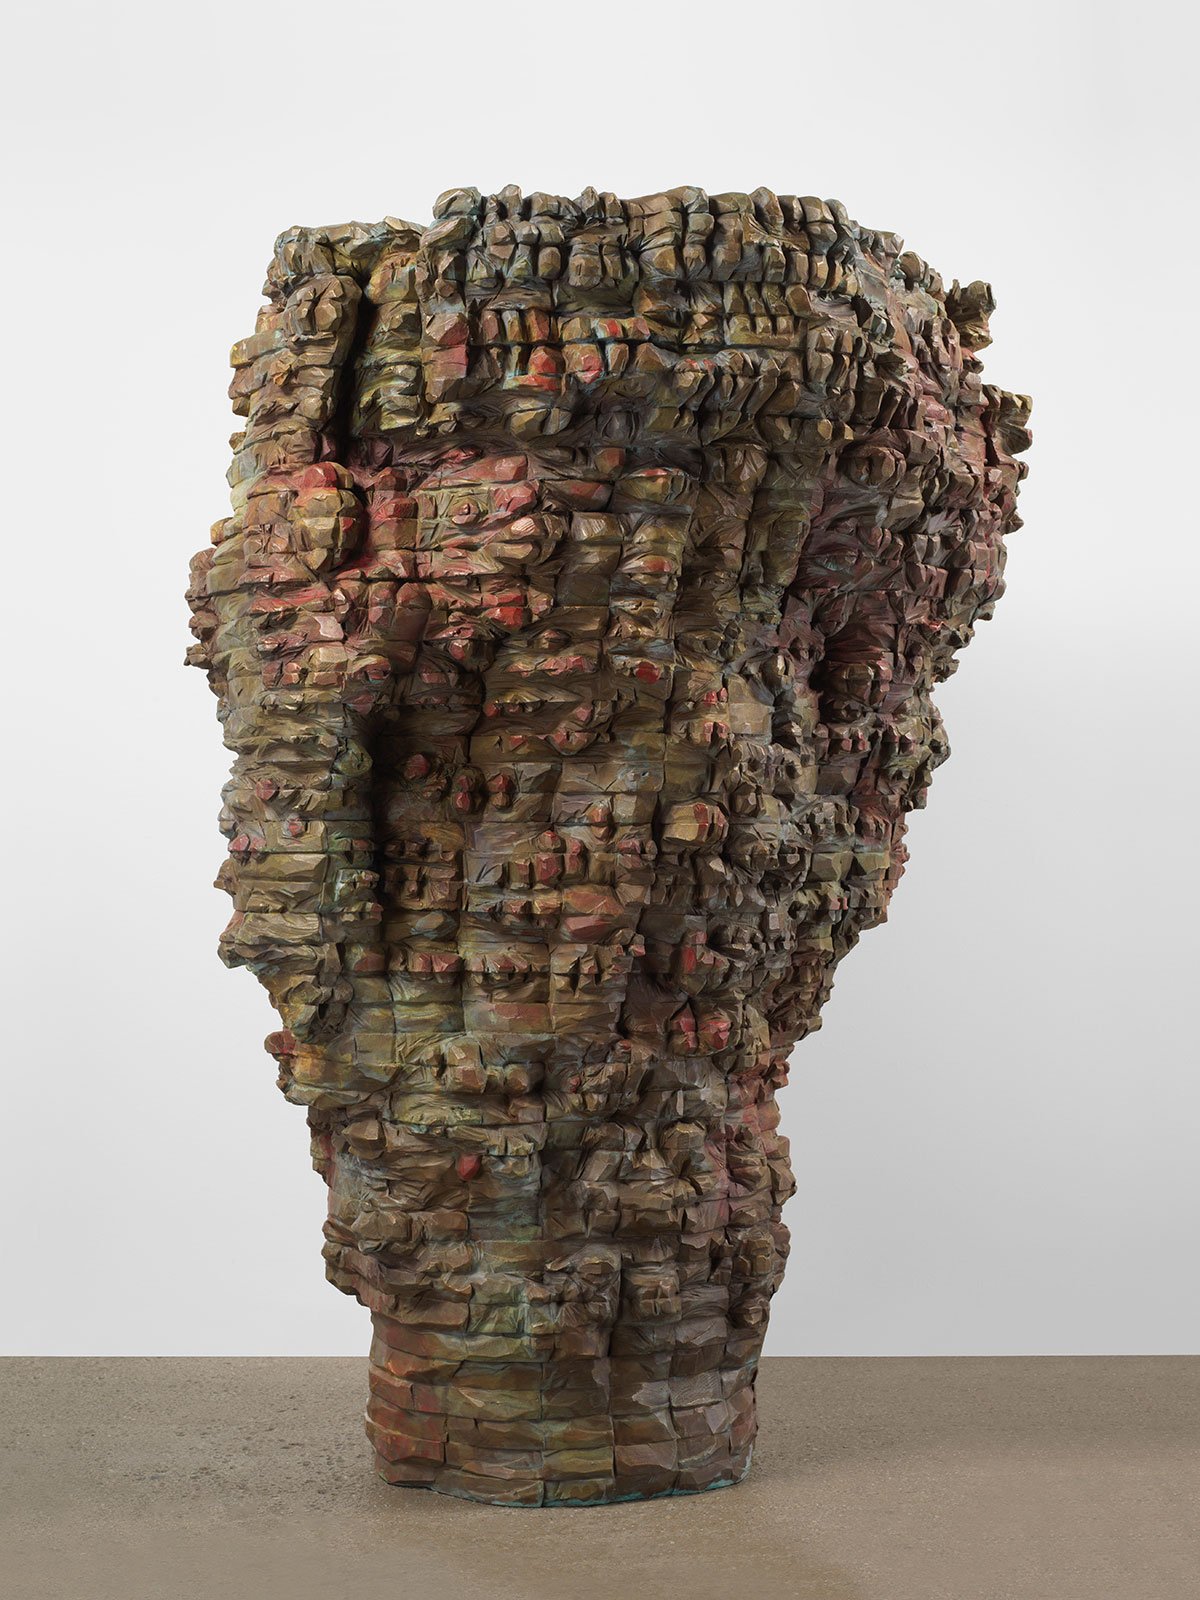  Ursula von Rydingsvard   Bowl with Fingers , 2022  Bronze  64.5 x 40 x 37.5 in.  Edition 1 of 5, with 2   MORE IMAGES  